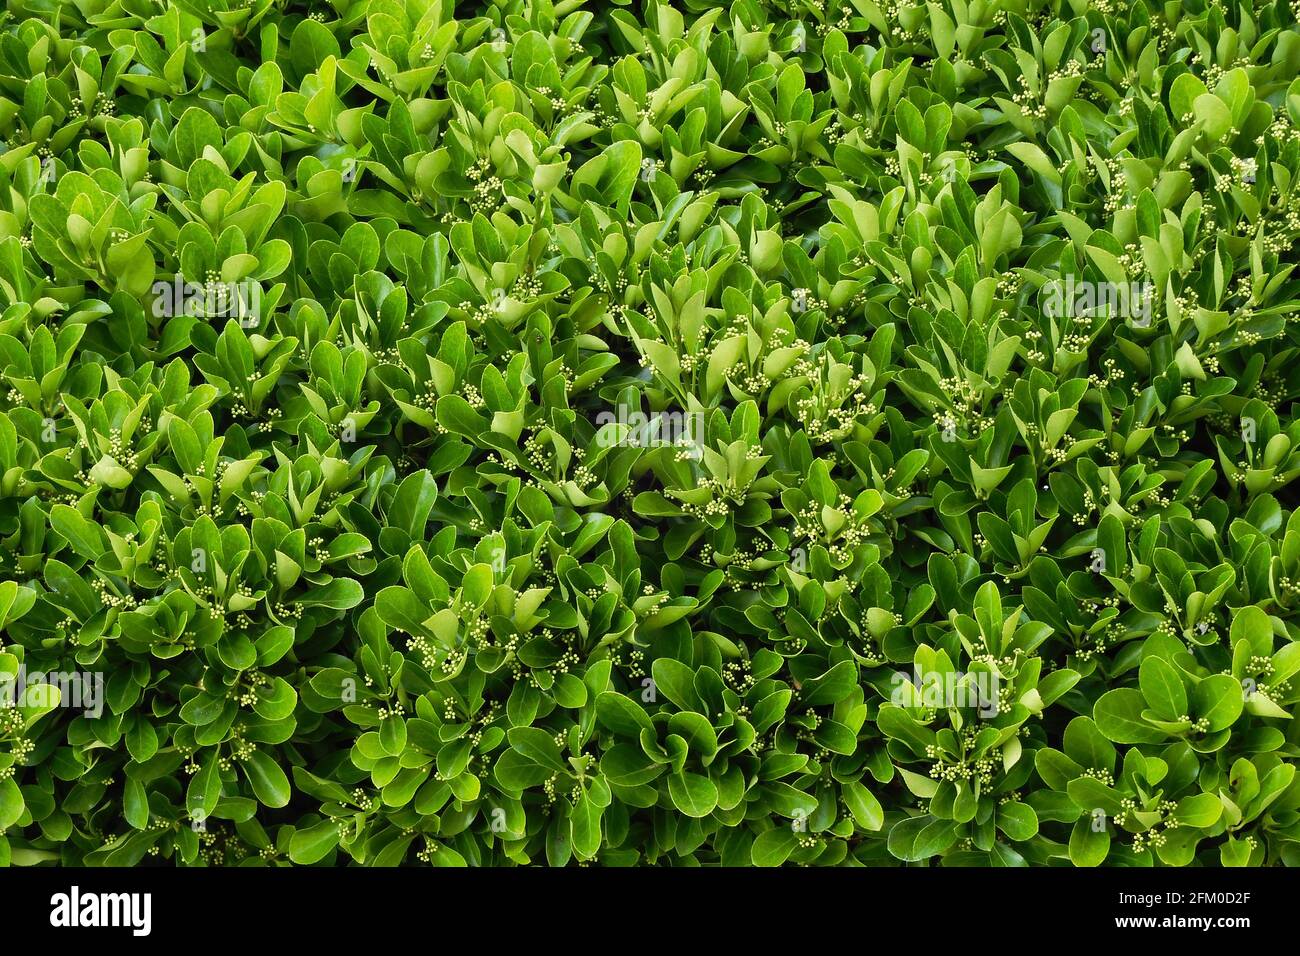 Green leafy hedge texture of leaves in Palavas les Flots, Occitanie, south of France Stock Photo